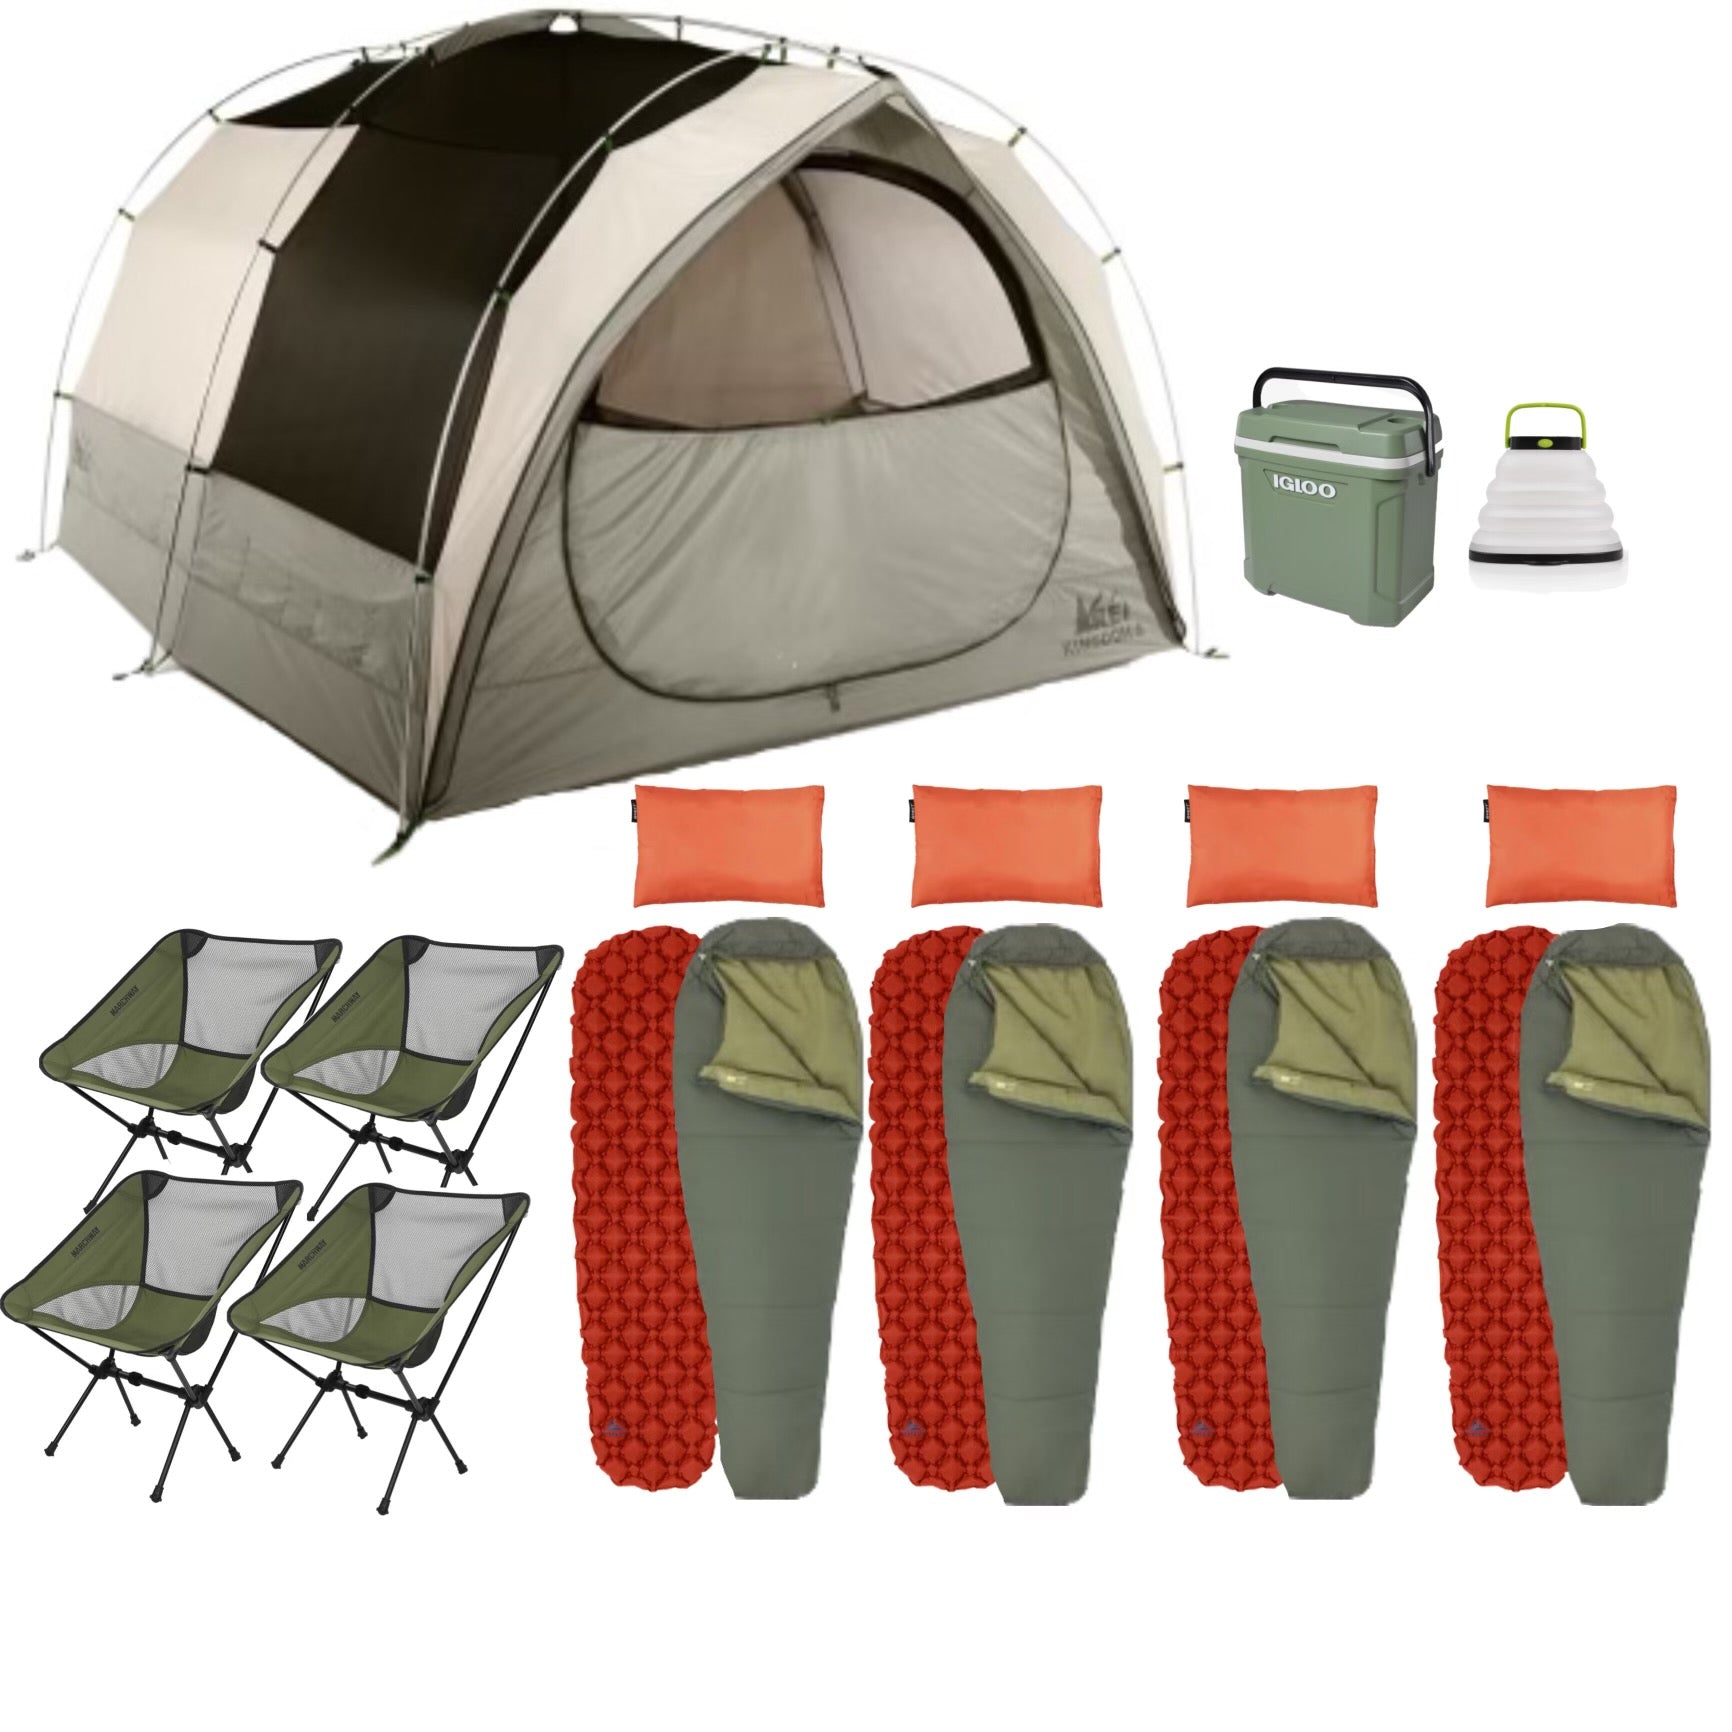 REDWOOD: 3 person Tent & Gear rental: Expedition Package – Camping